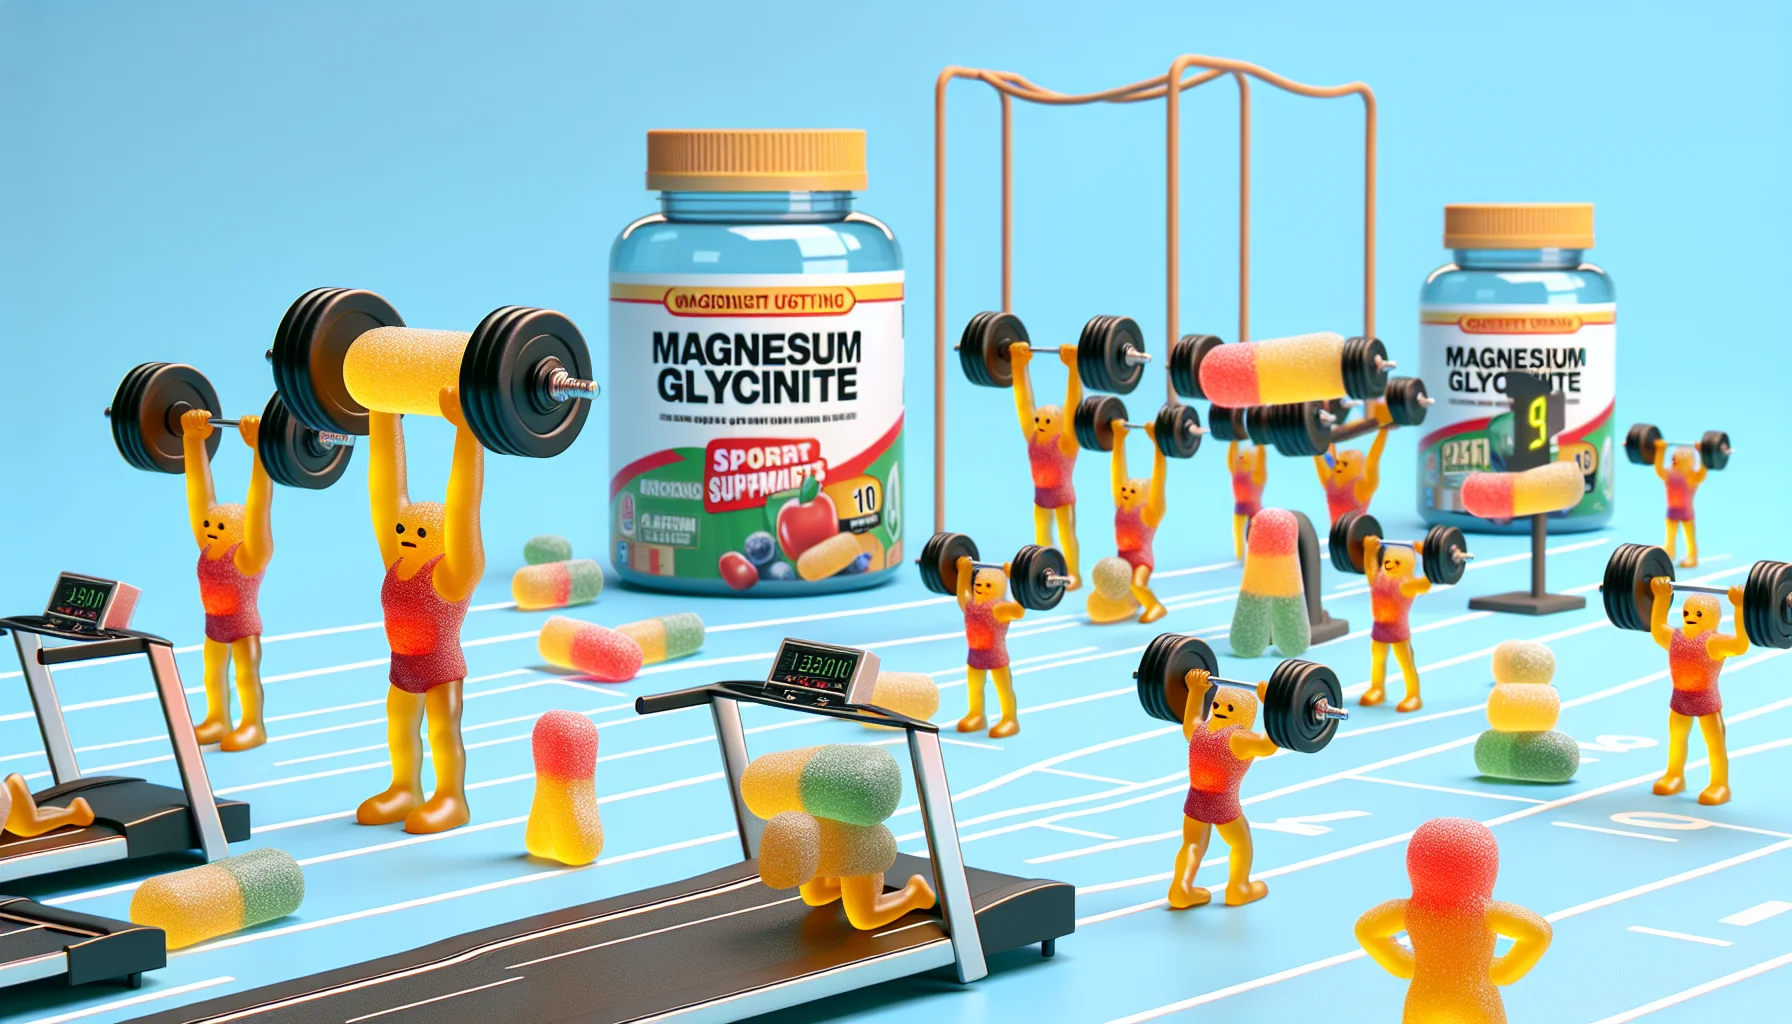 Create a realistic and humorous image of magnesium glycinate gummies resembling small, comical weights, all set in a sports scenario. They are lifting each other, pretending to be athletes, to signify their use as sport supplements. Include details that suggest a lighthearted atmosphere, like gummy spectators standing by a 'Finish Line' banner and some gummies attempting to run on a treadmill. The colors should be bright and playful to signify the enticing gummy nature of these supplements.